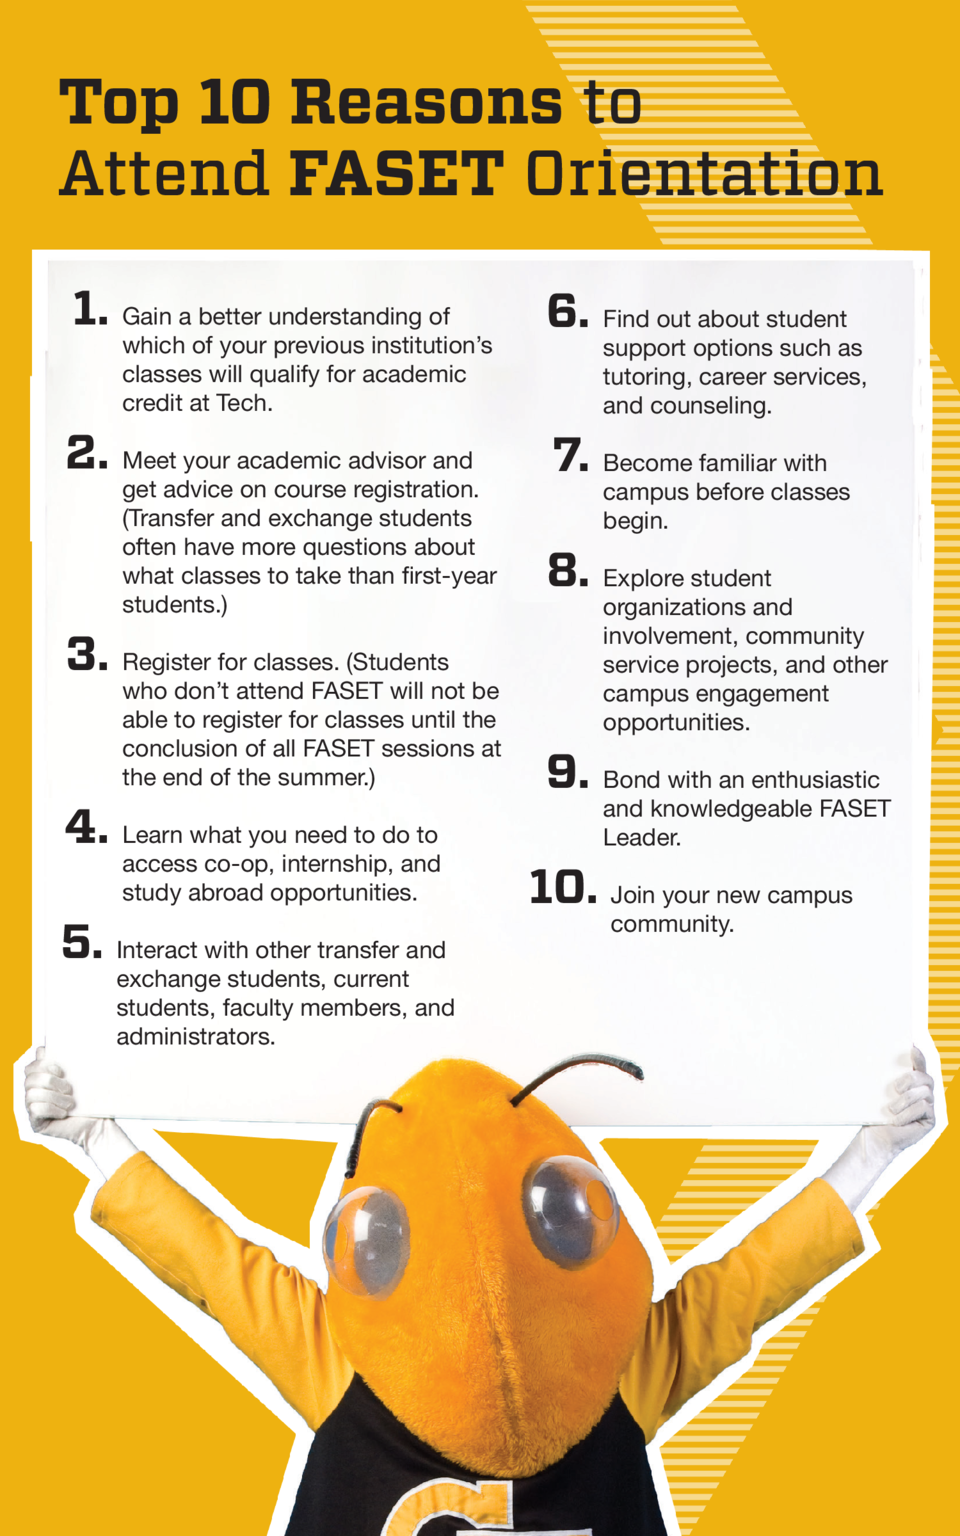 Top 10 Reasons to Attend FASET Orientation ain a better understanding of   6.  Find out about student   1.  Gwhich of your...